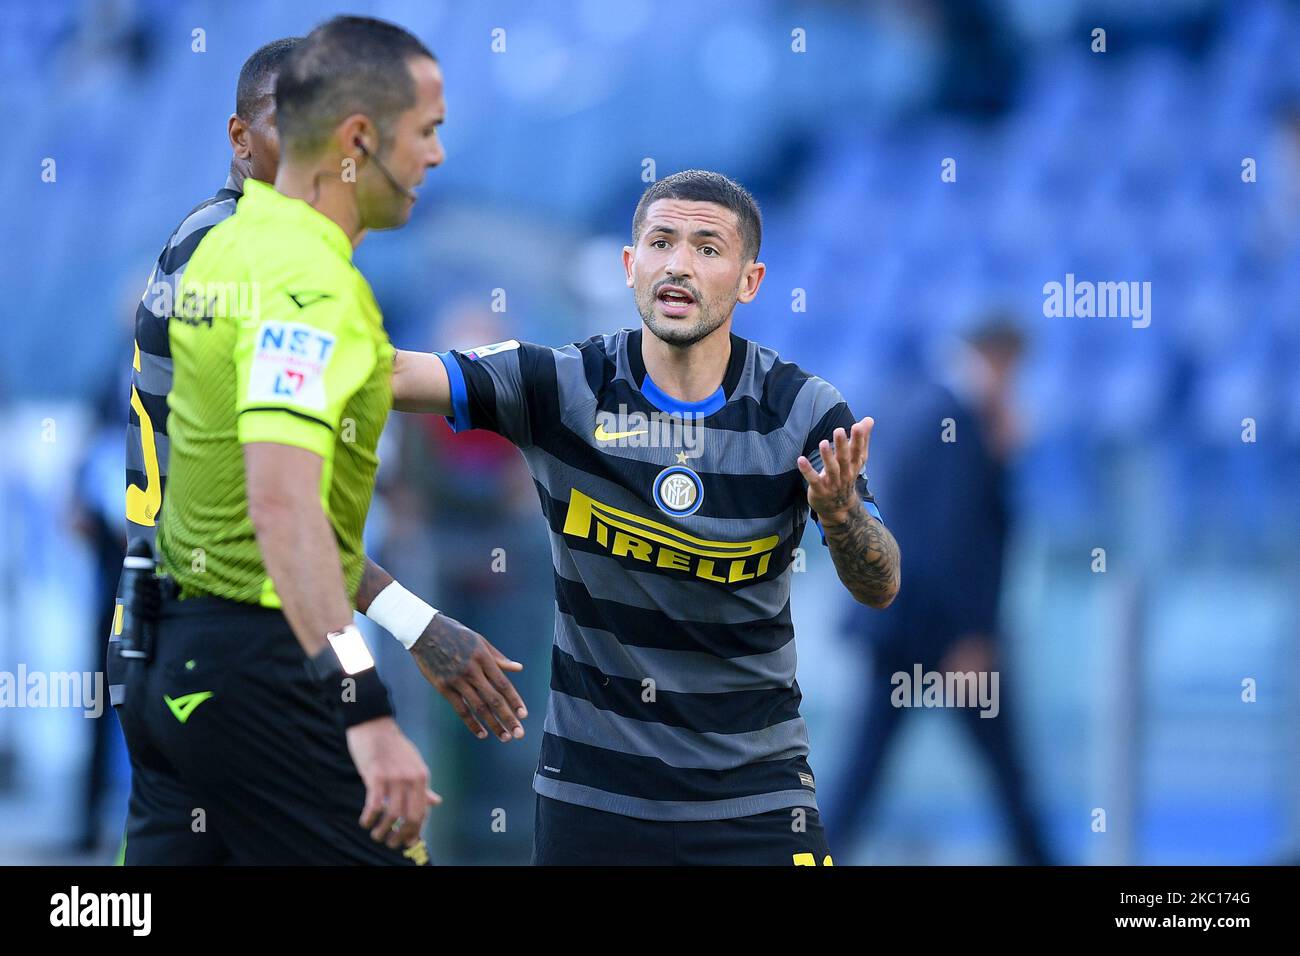 Stefano Sensi of FC Internazionale protests with the referee after receiving a red card during the Serie A match between SS Lazio and FC Internazionale at Stadio Olimpico, Rome, Italy on 4 October 2020. (Photo by Giuseppe Maffia/NurPhoto) Stock Photo